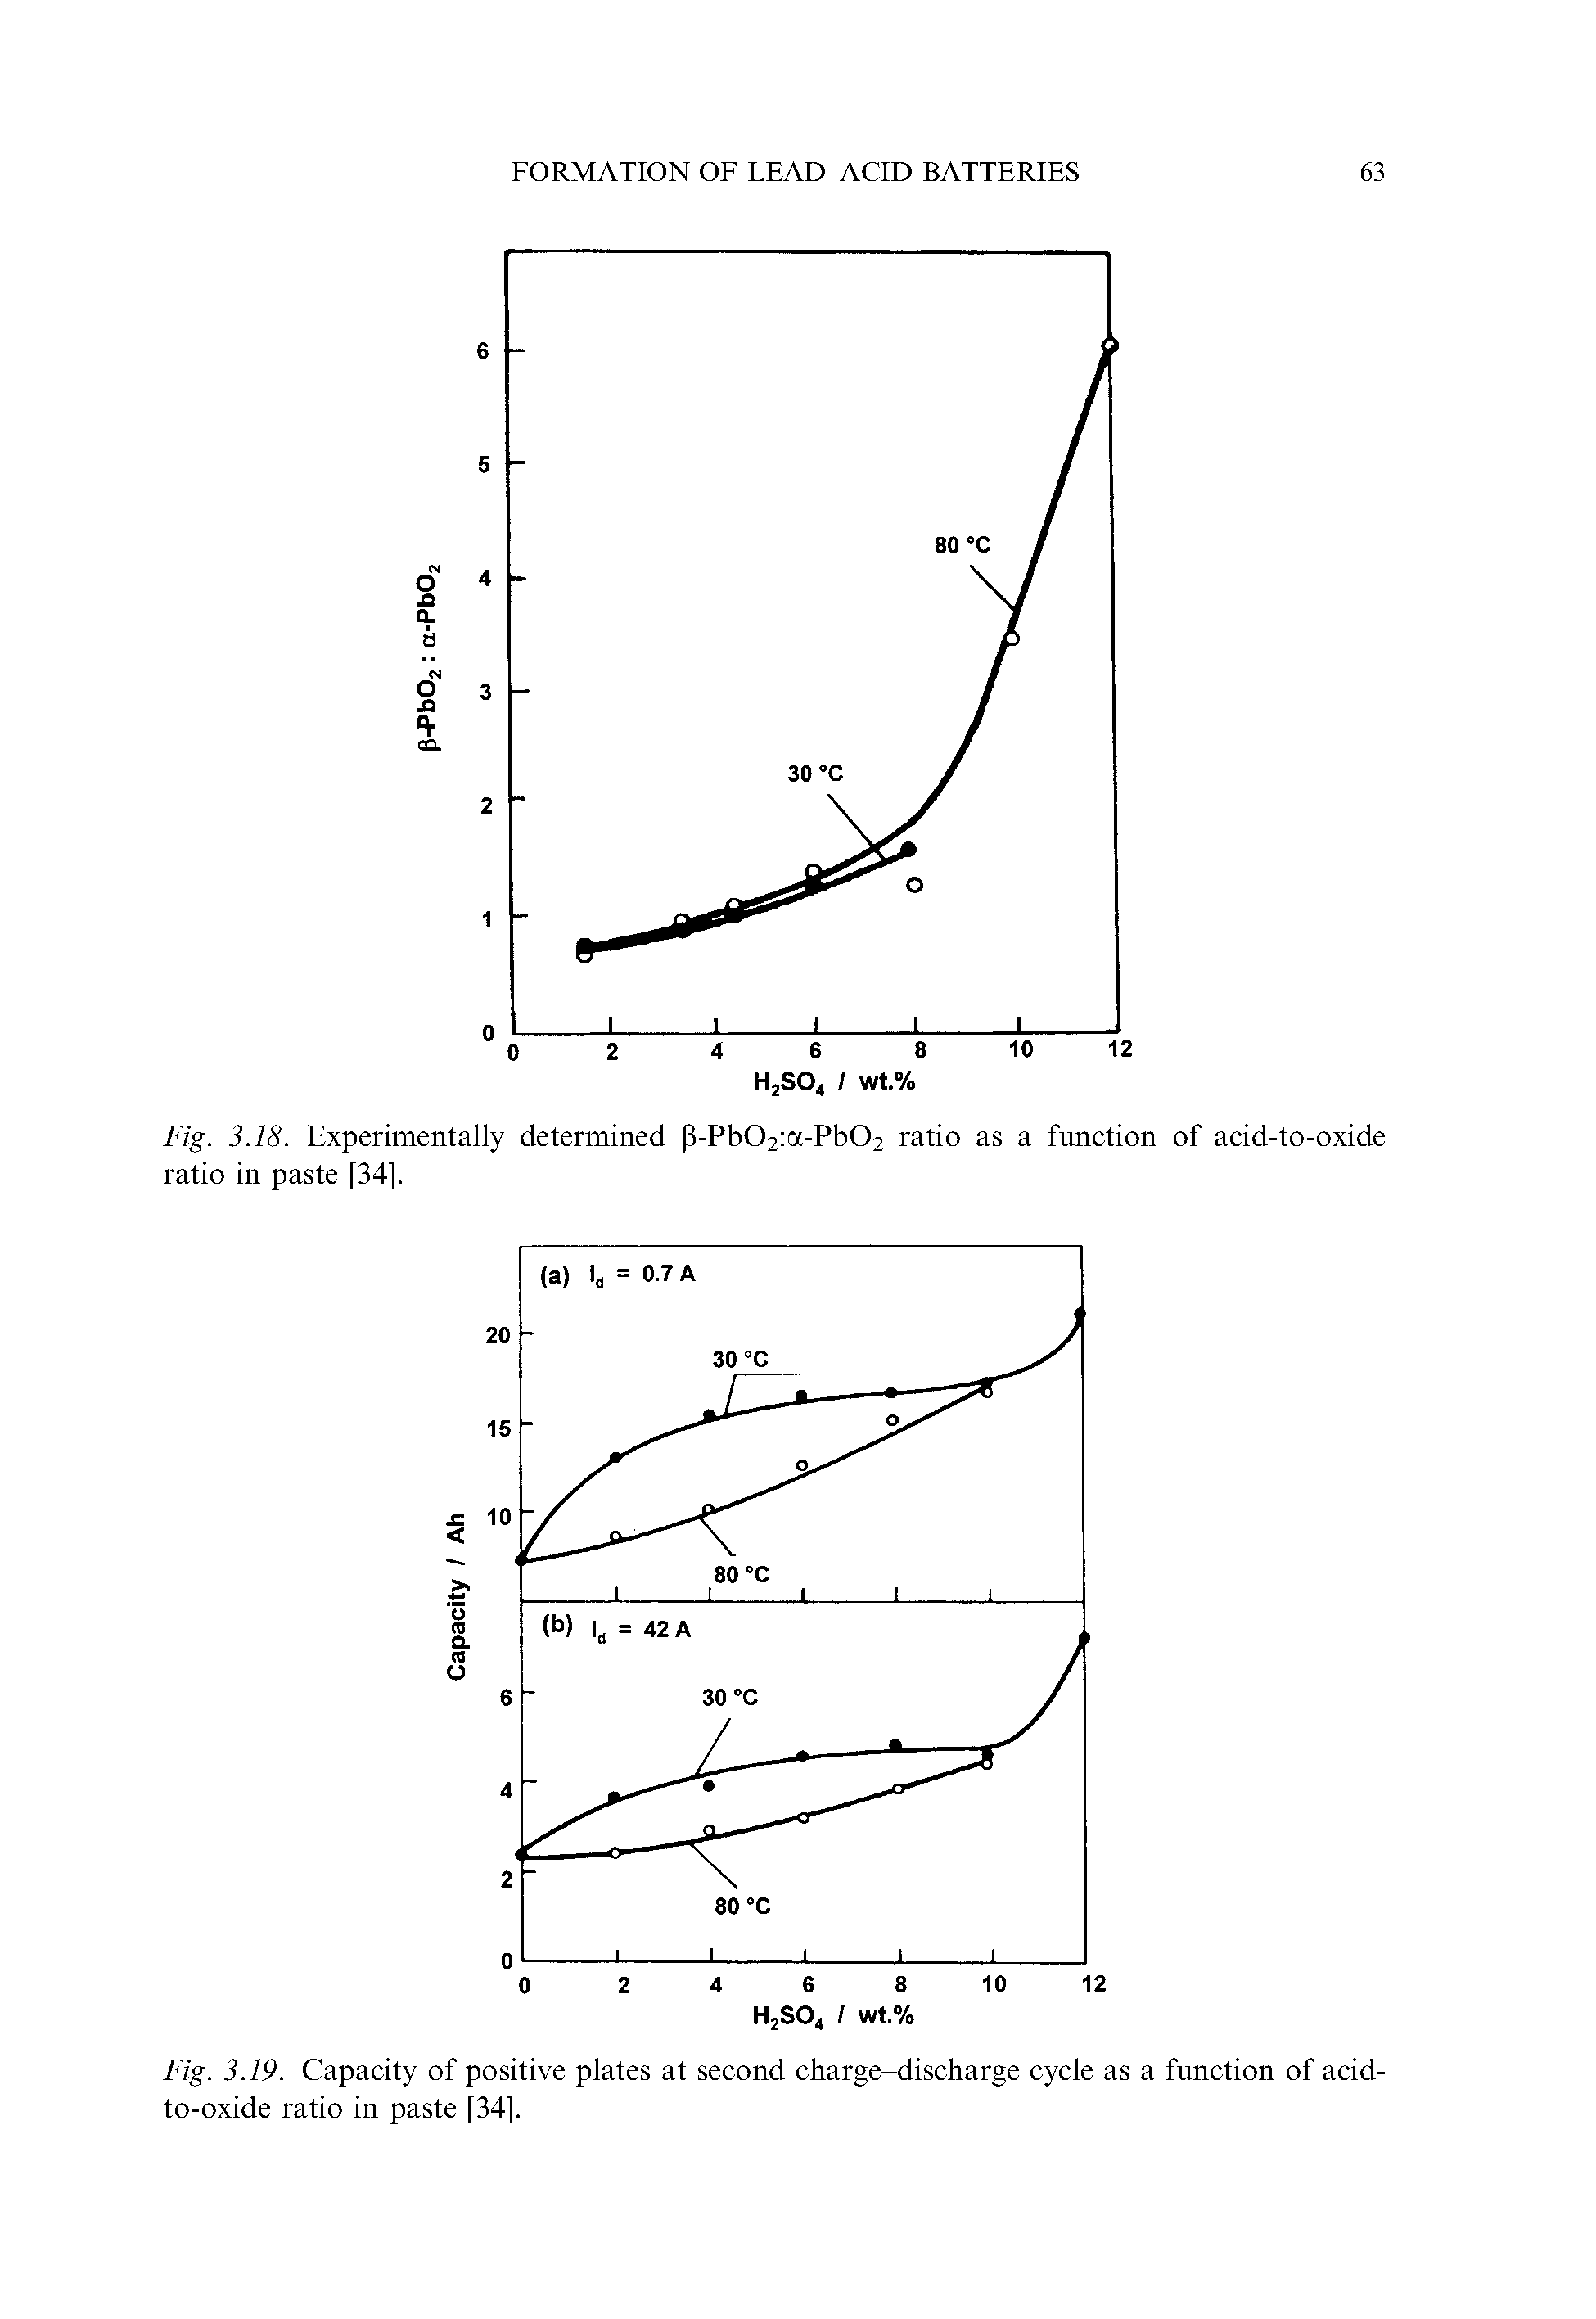 Fig. 3.19. Capacity of positive plates at second charge-discharge cycle as a function of acid-to-oxide ratio in paste [34].